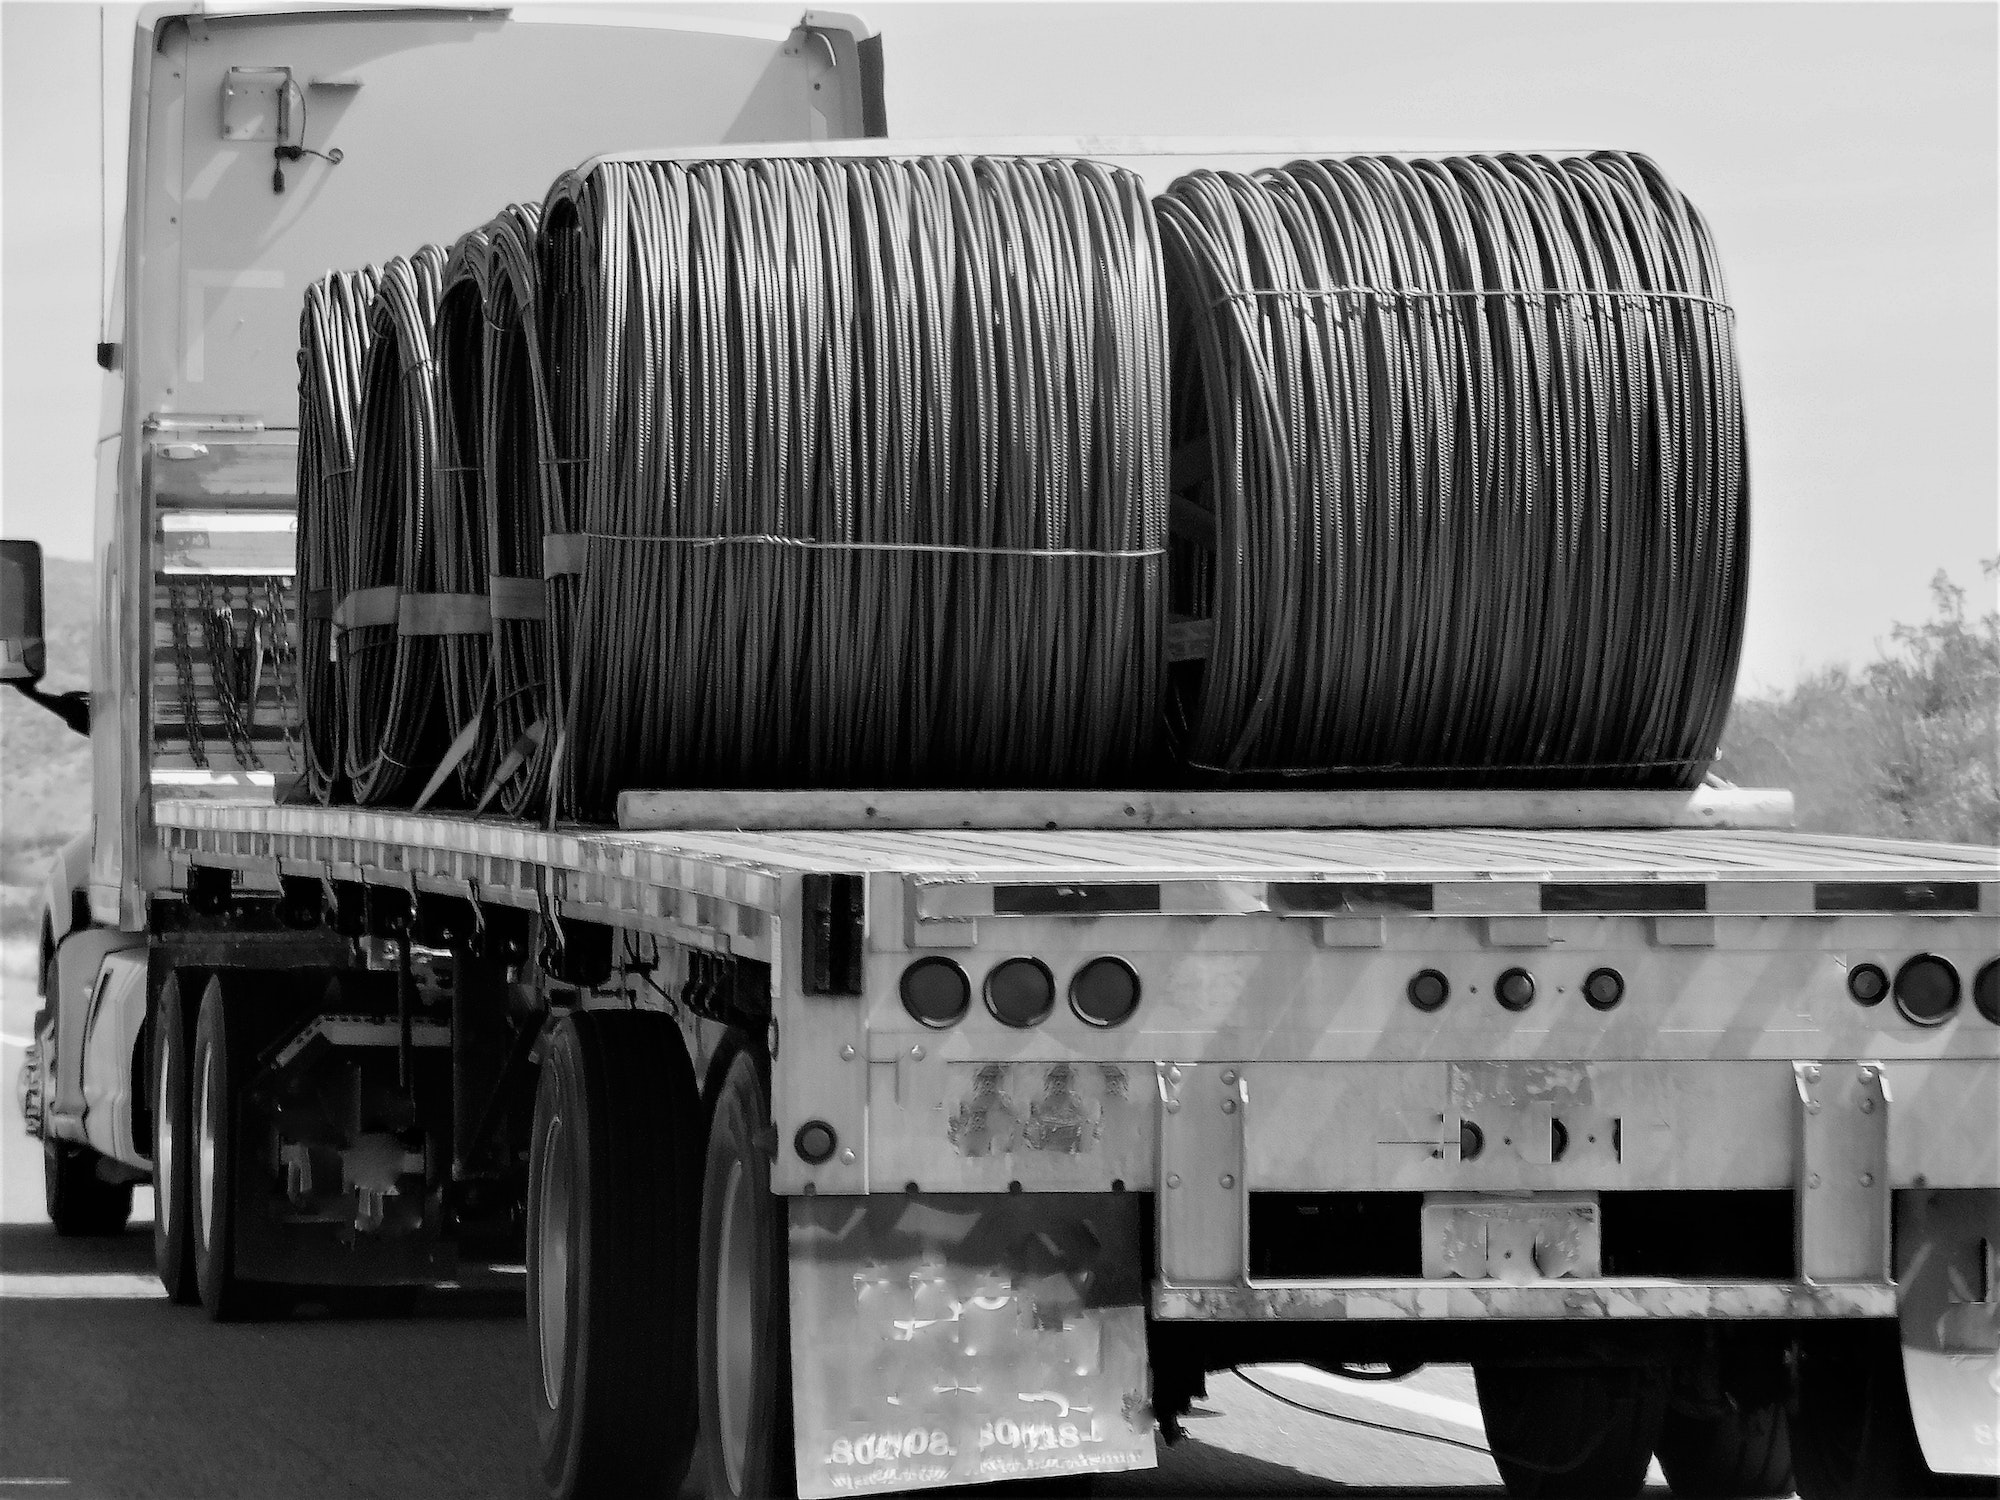 Big Rig Semi Truck Hauling Flat Bed Filled with Coils of Wire!